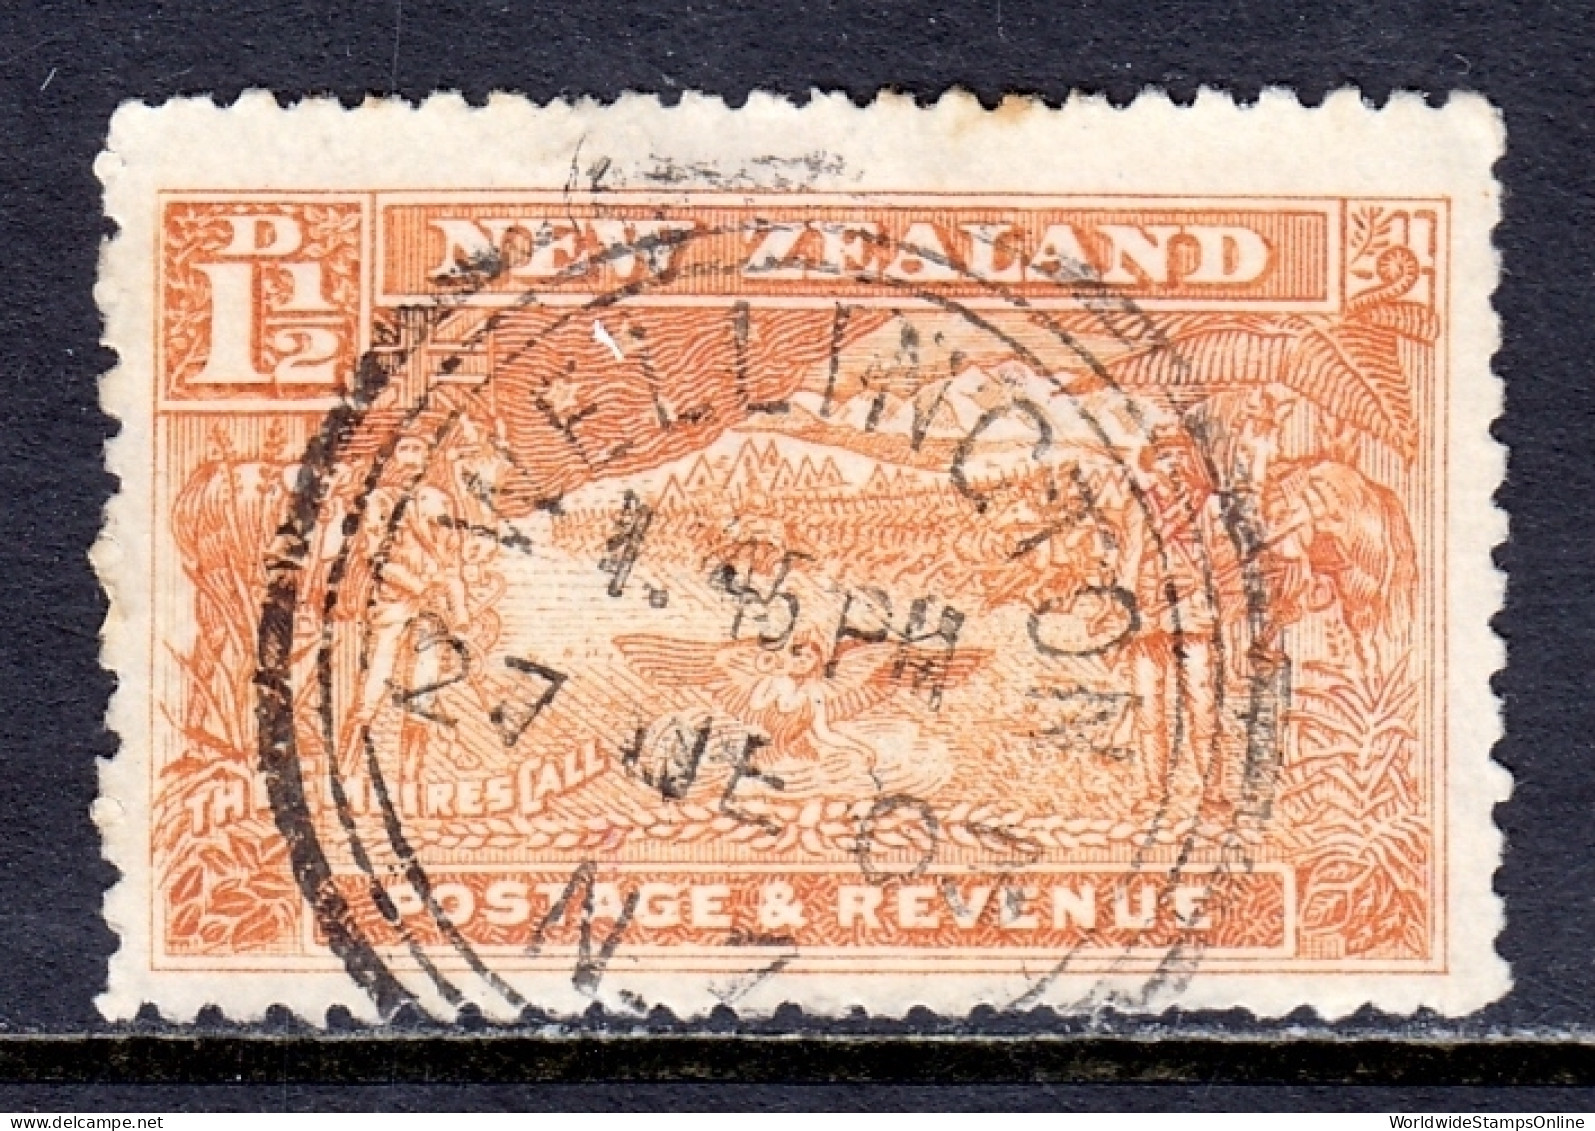 New Zealand - Scott #101 - Used - Toned Perf At Top - SCV $20 - Used Stamps